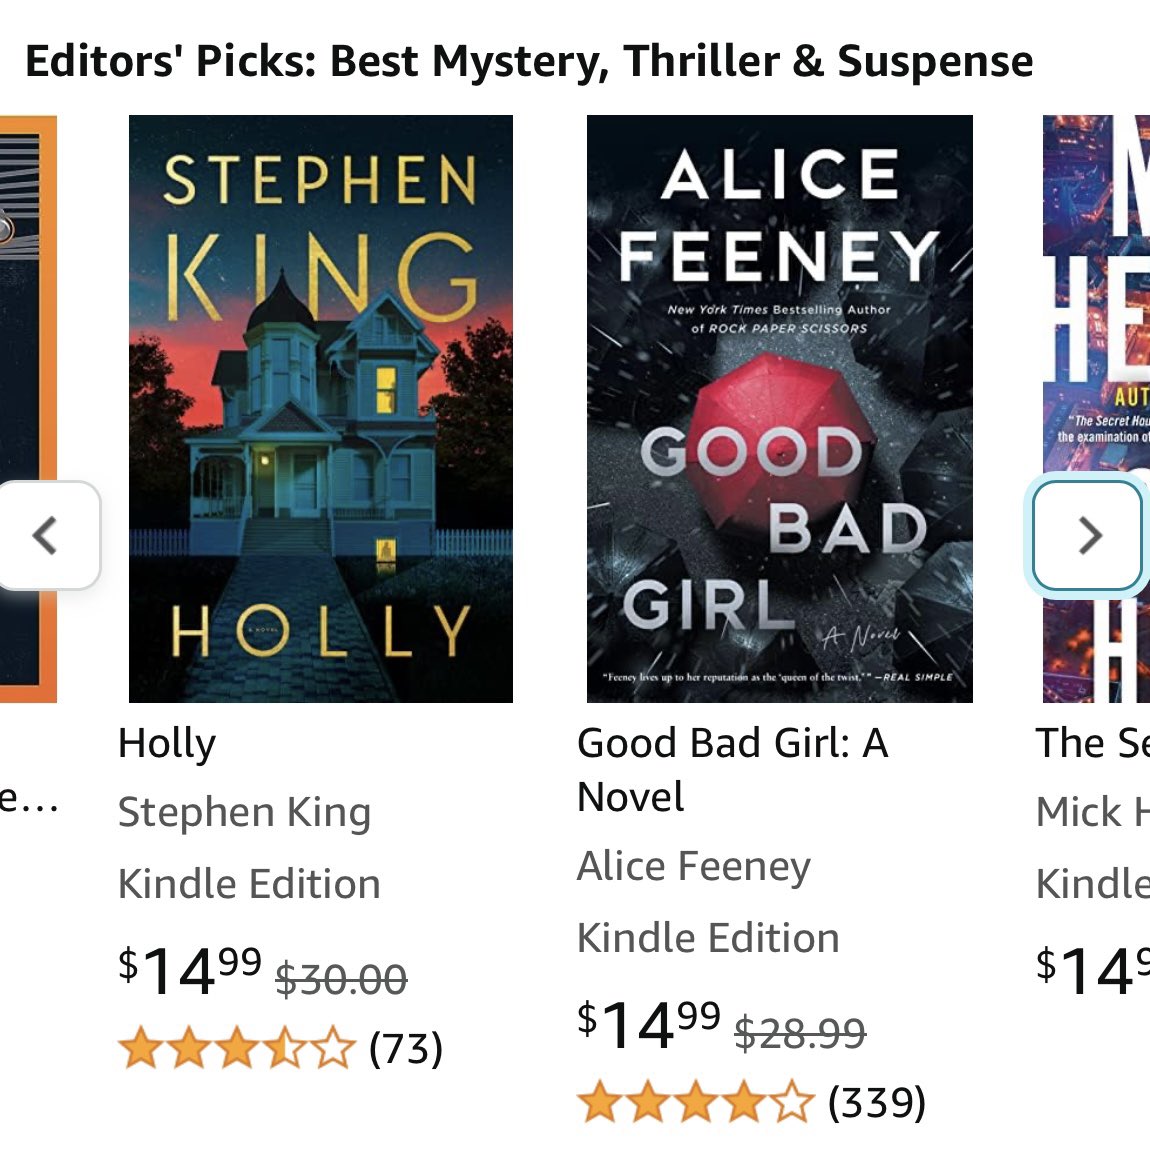 Chuffed to bits that GOOD BAD GIRL has been selected by Amazon editors as one of the best books to read this month! UK readers, the ebook is 99p FOR ONE DAY ONLY if you might like to grab a bargain.